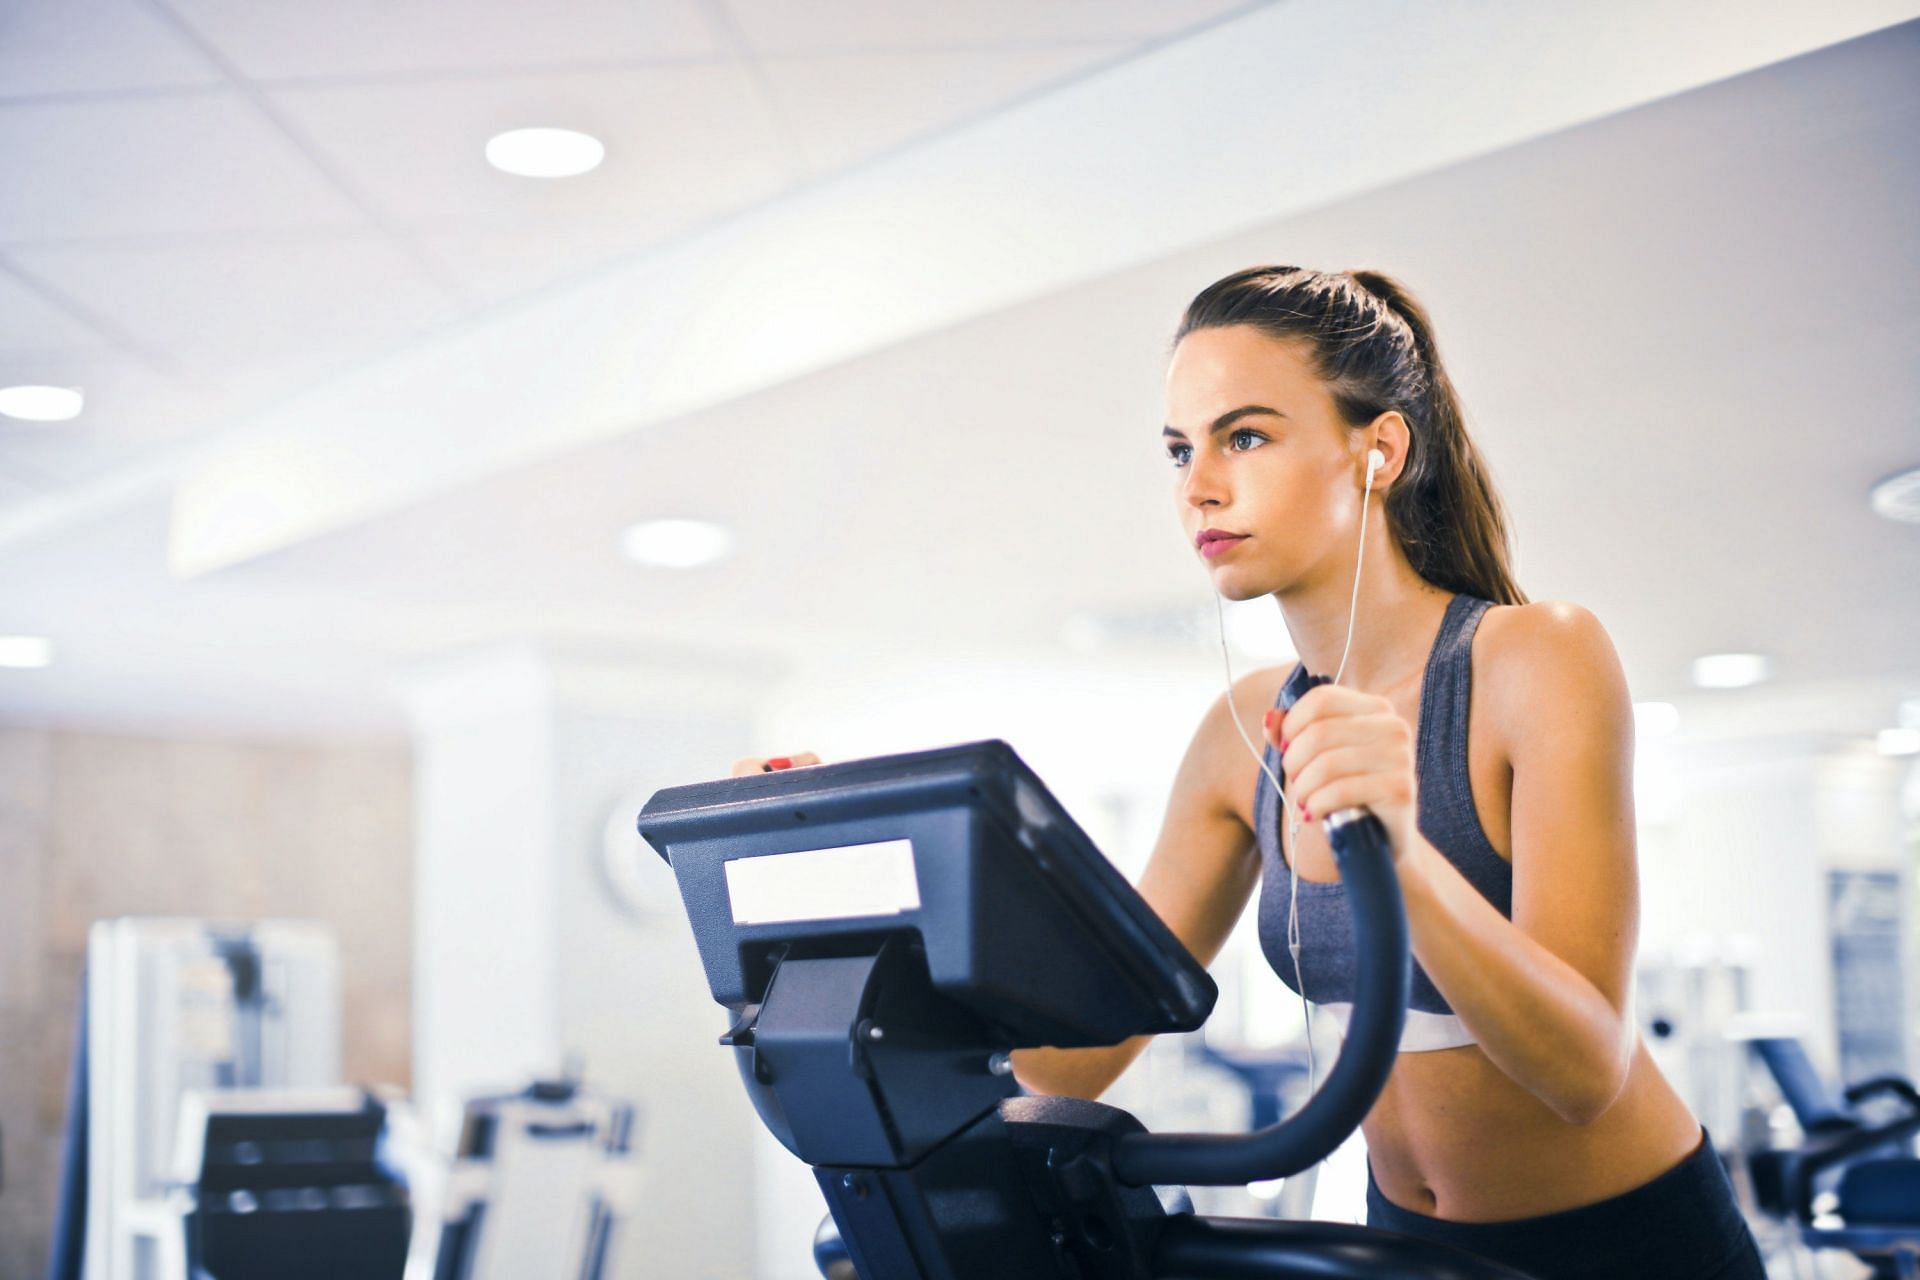 Treadmill incline exercises can help runners to up their game and increase their speed. (Image via Pexels/Andrea Piacquadio)